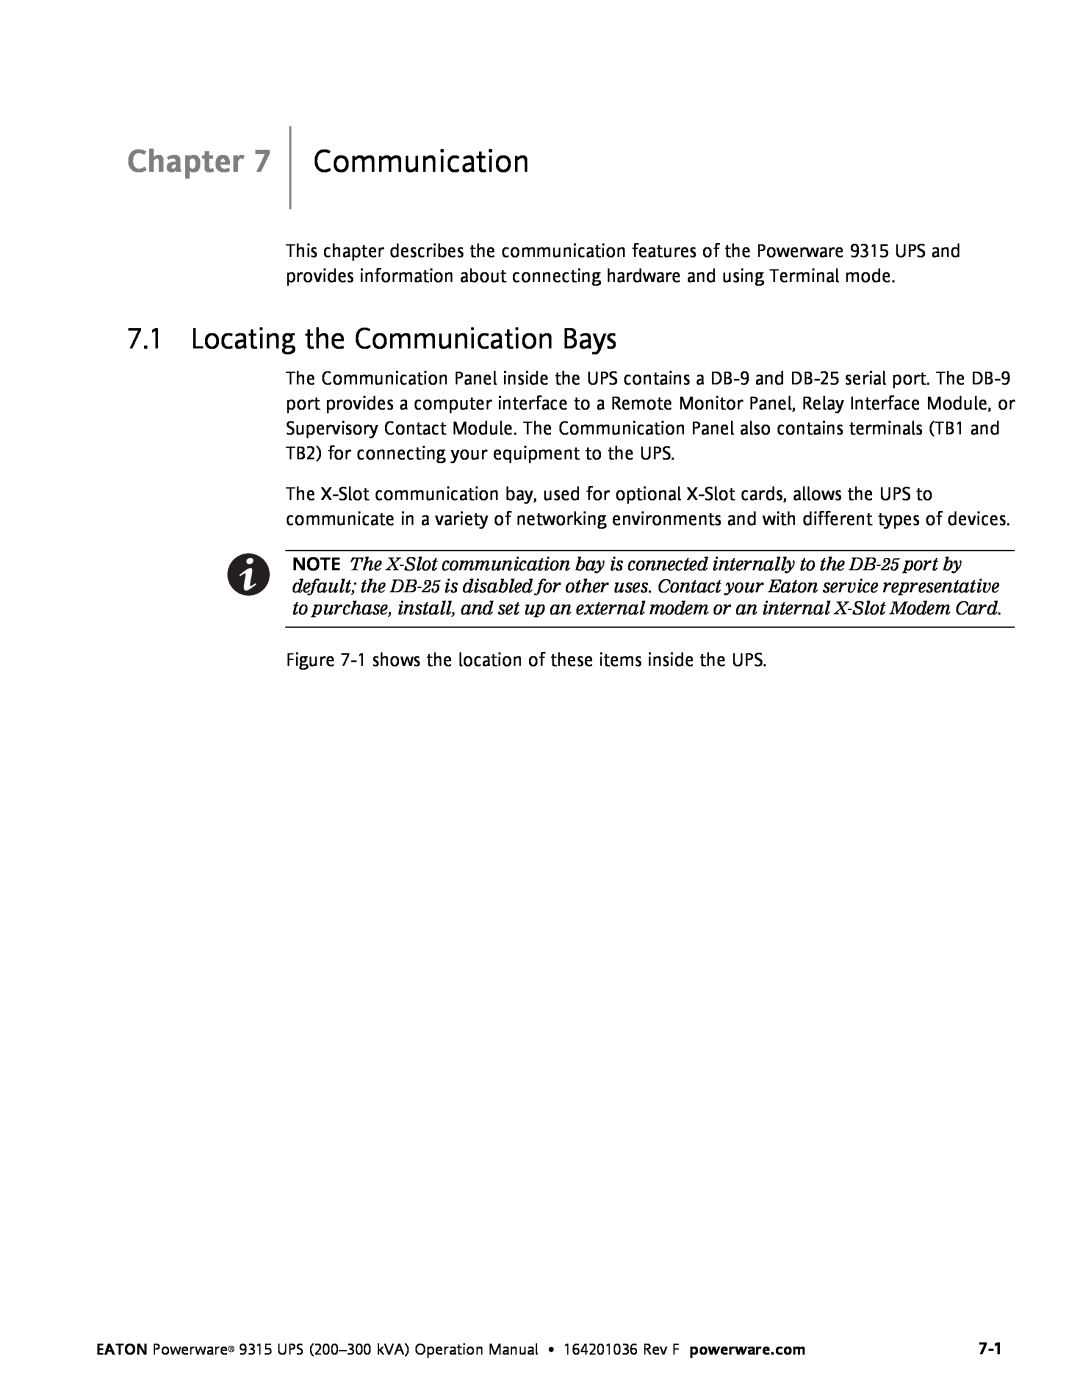 Eaton Electrical Powerware 9315 operation manual Locating the Communication Bays, Chapter 